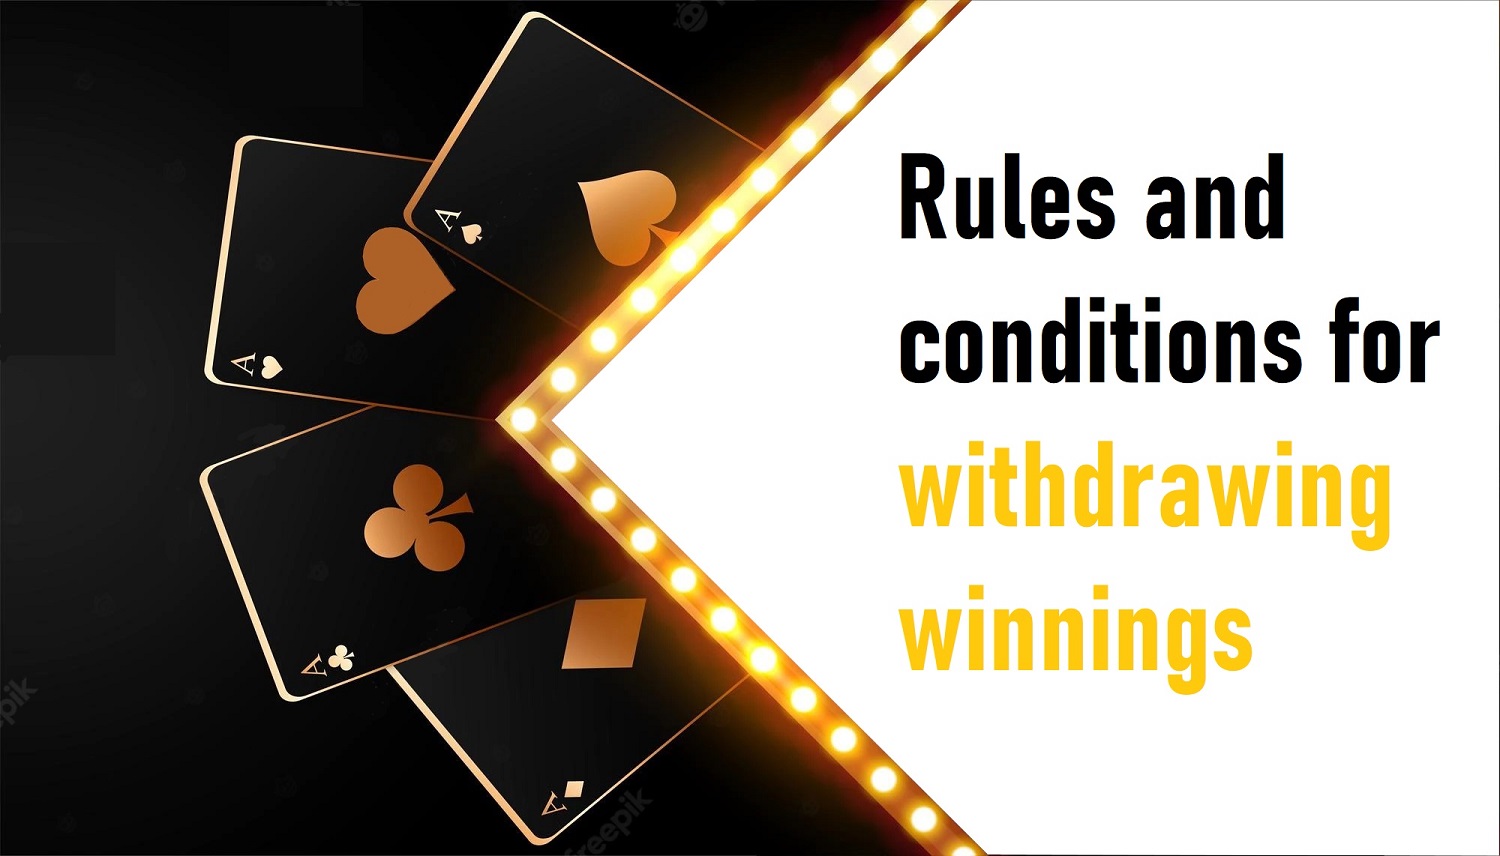 Rules and conditions for withdrawing winnings